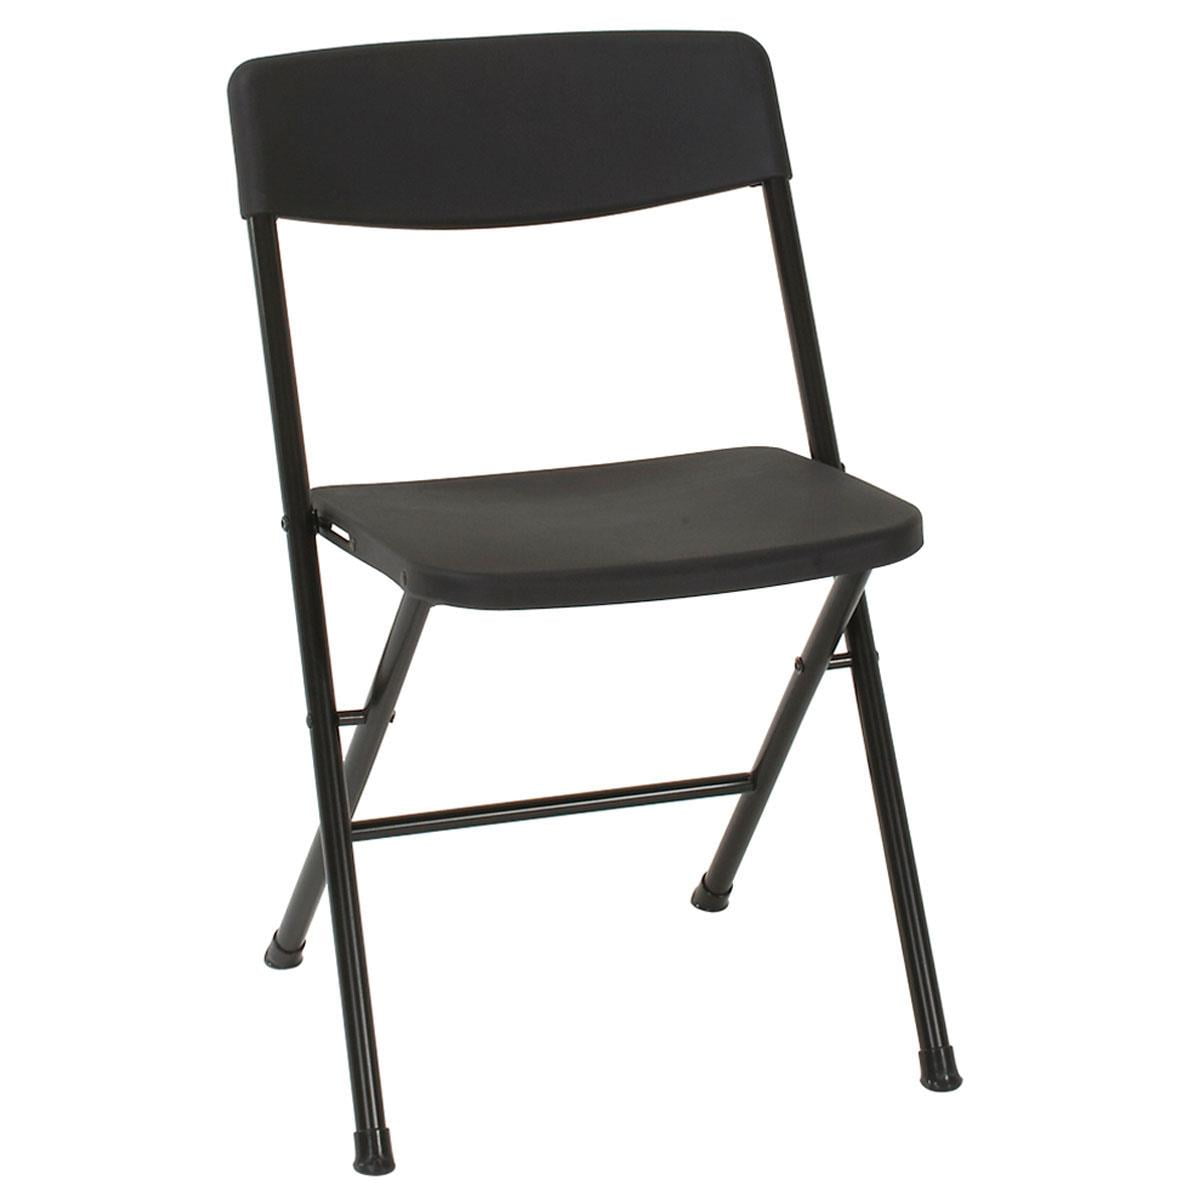 Resin Folding Chair with Molded Seat and Back, Black, 4-Pack - Walmart.com